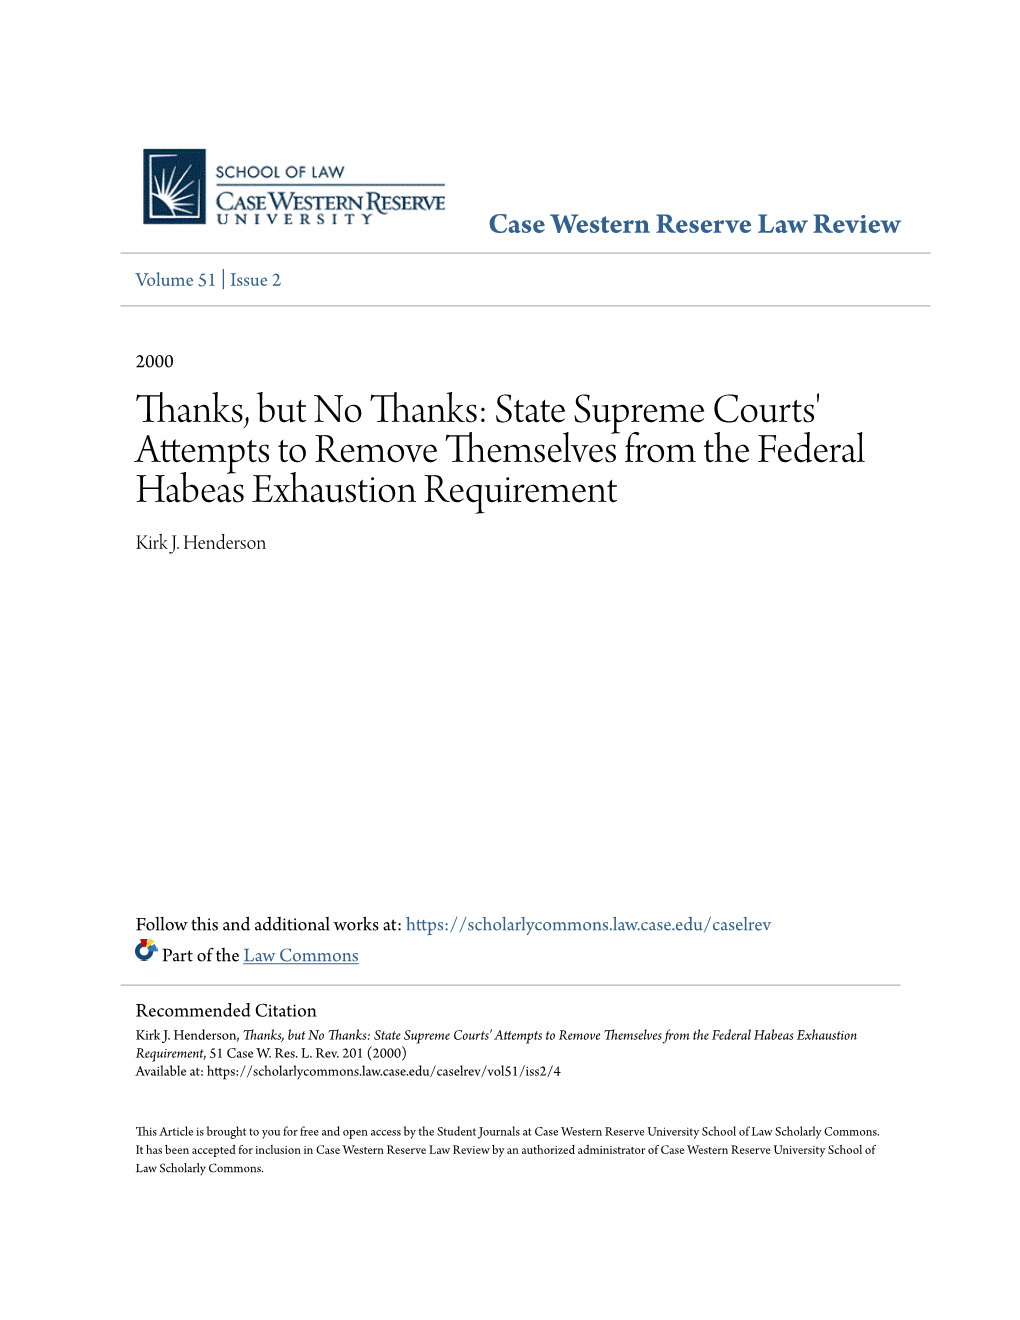 State Supreme Courts' Attempts to Remove Themselves from the Federal Habeas Exhaustion Requirement Kirk J